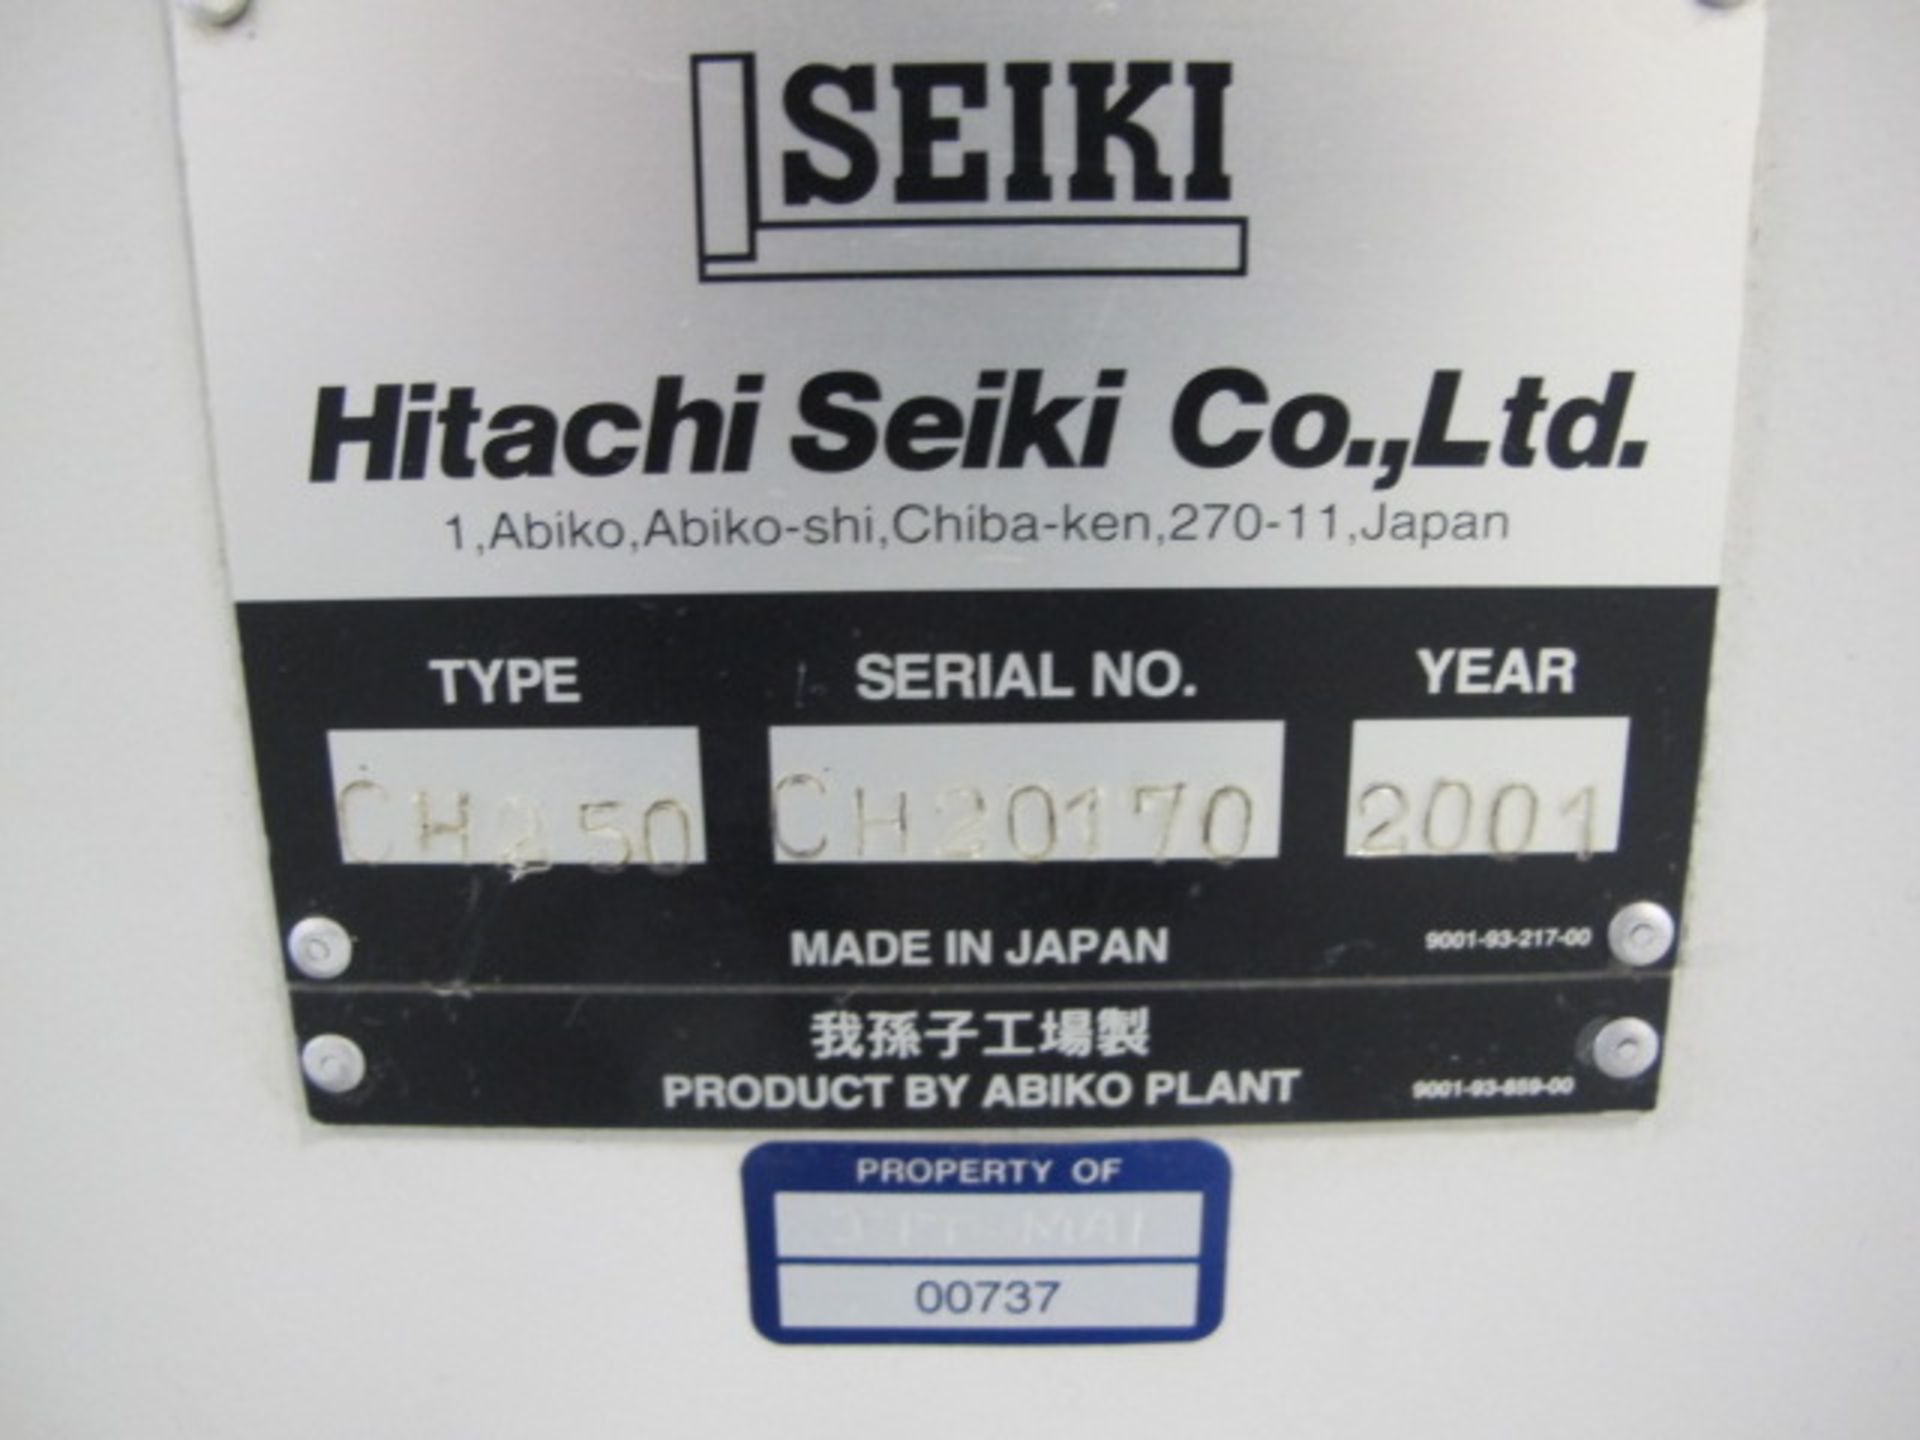 2001 Hitachi Seiki Super HiCell 250 5-Axis Twin Spindle Super Productive Integrated Machining Cell - Image 19 of 19